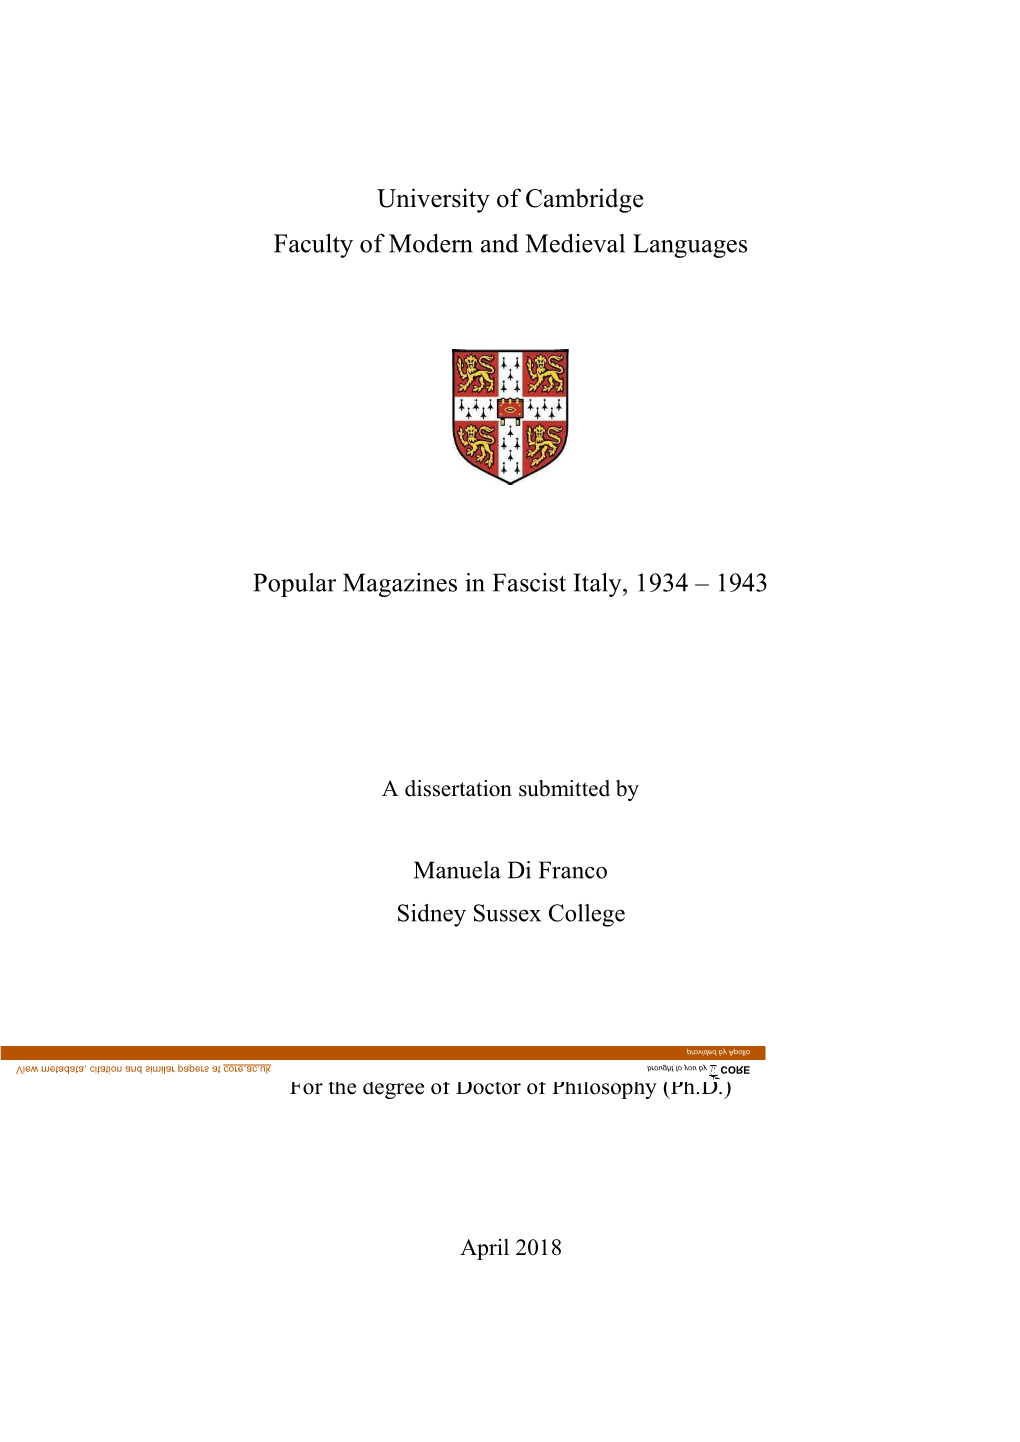 University of Cambridge Faculty of Modern and Medieval Languages